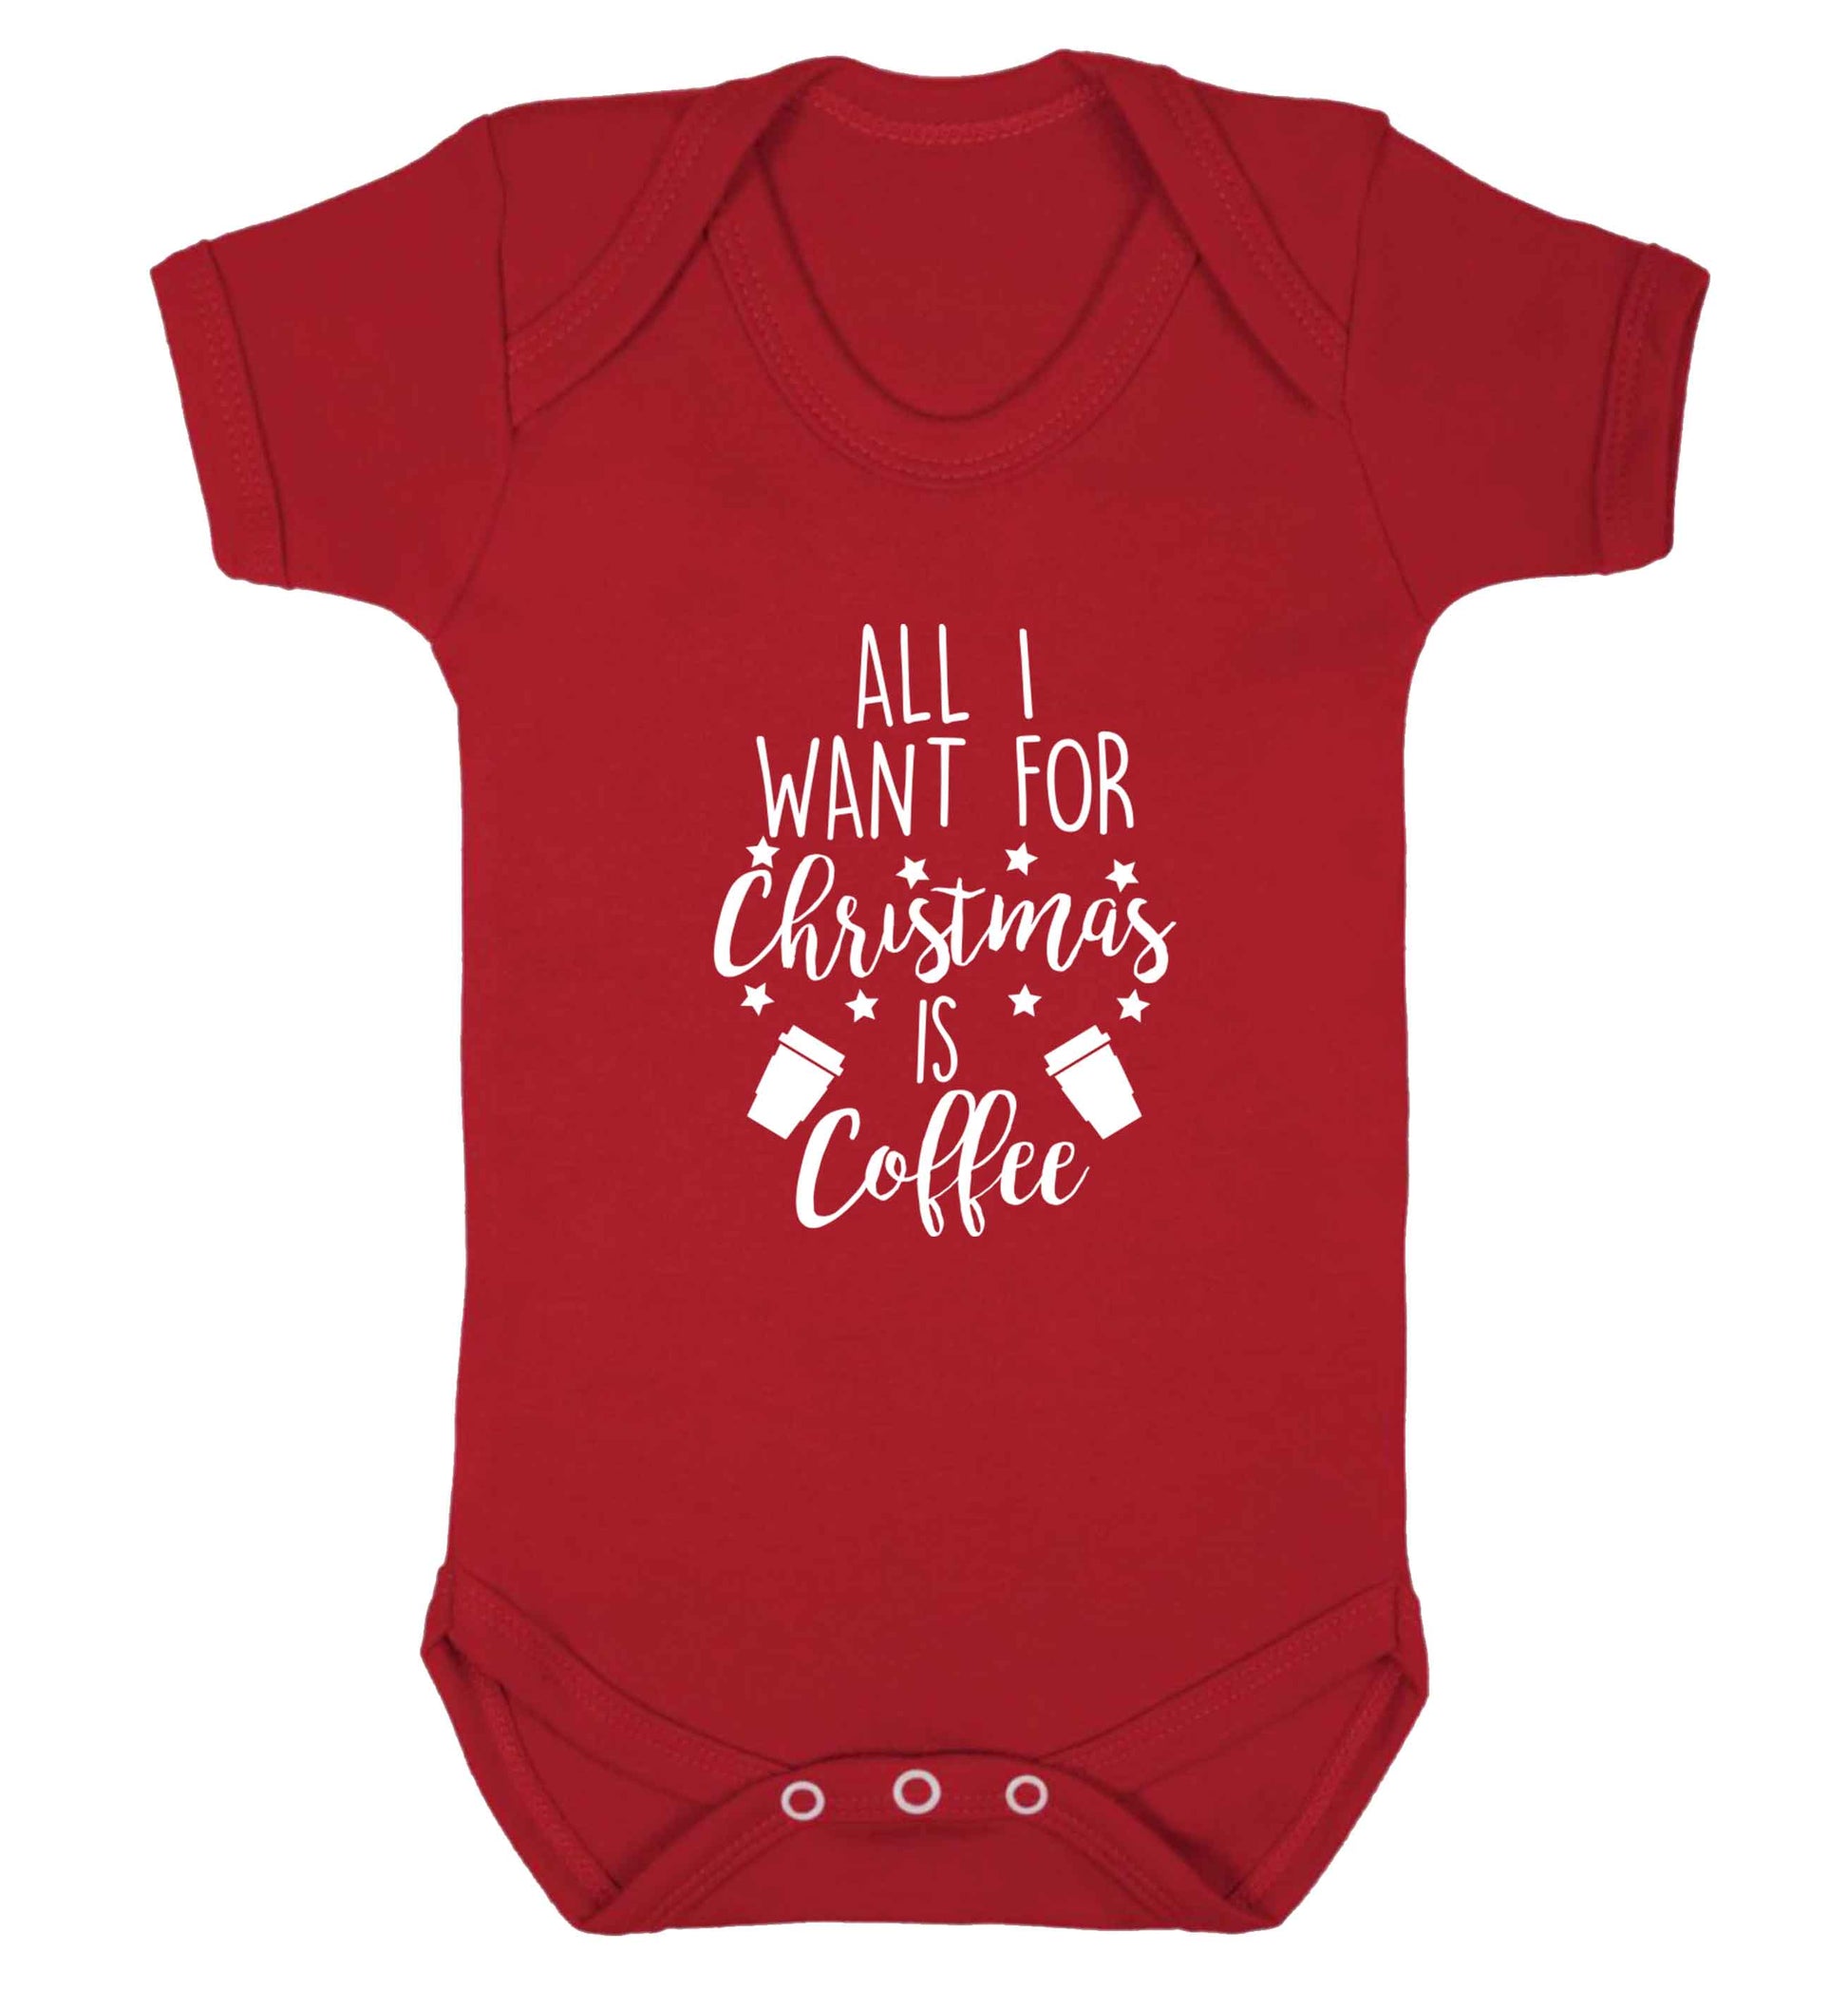 All I want for Christmas is coffee Baby Vest red 18-24 months